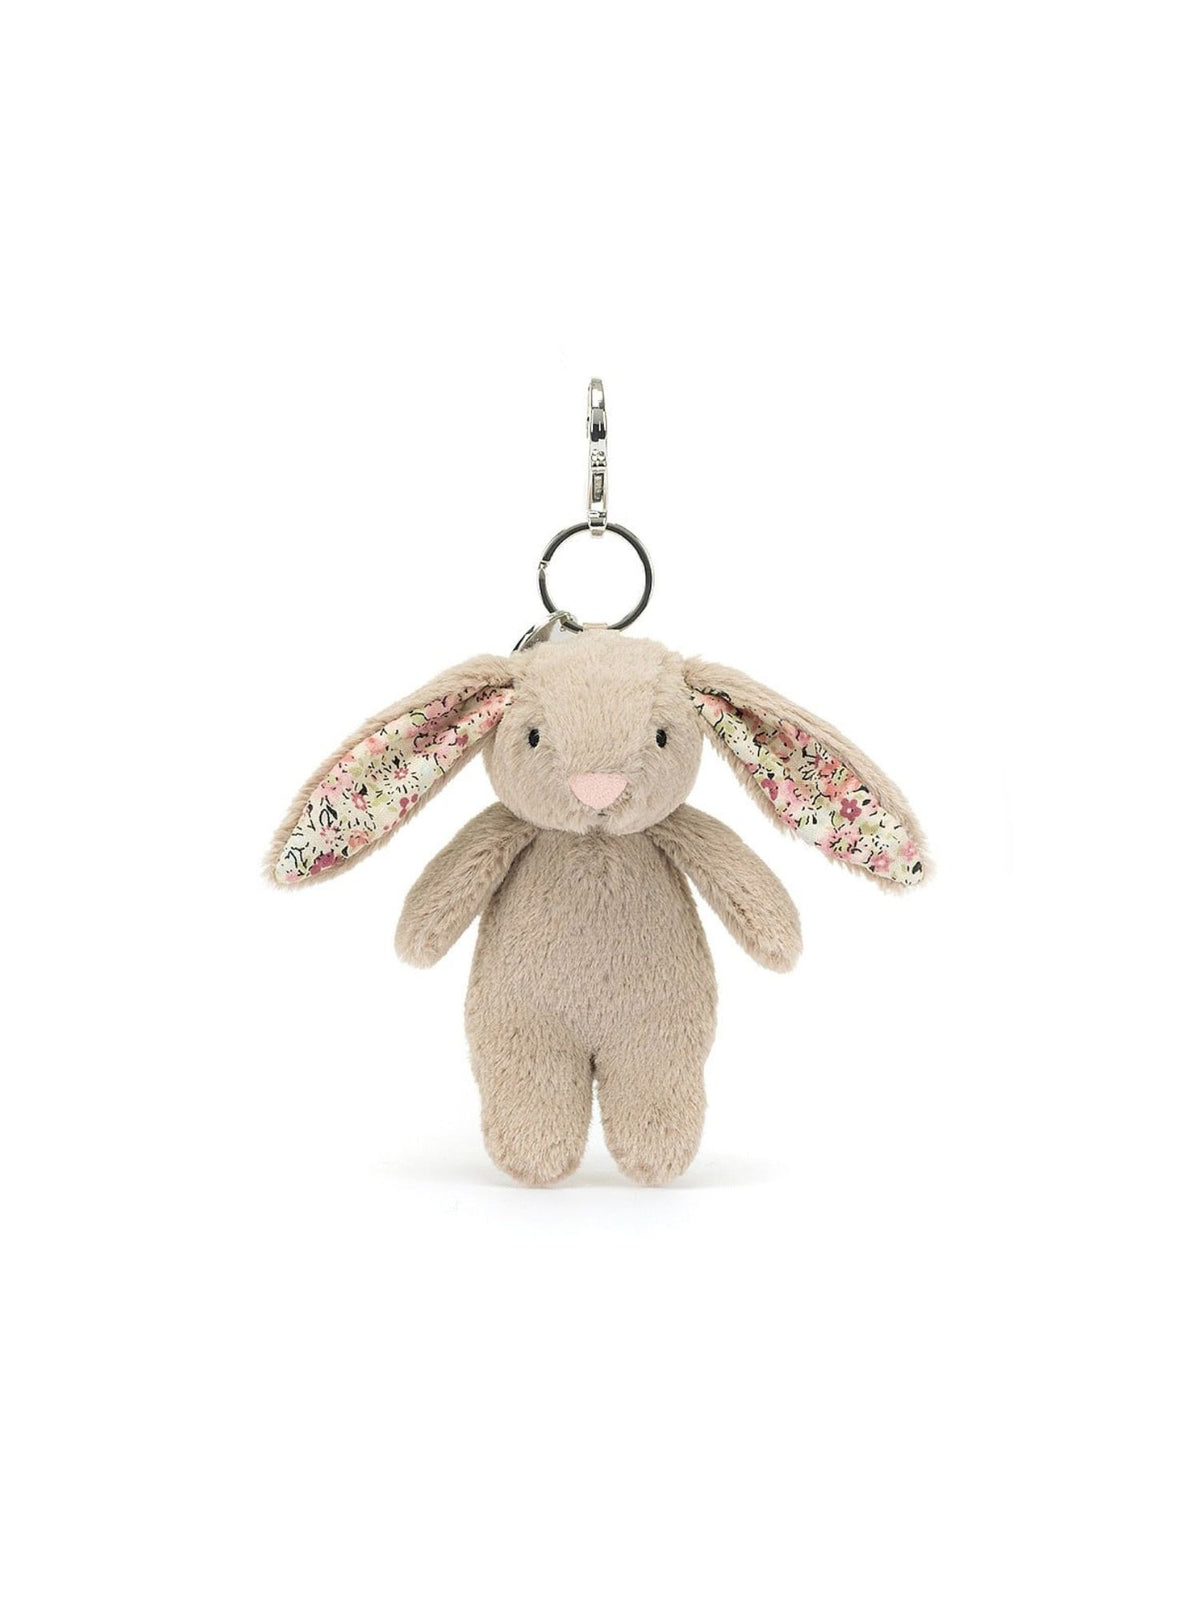 jellycat blossom bunny bag charm in beige